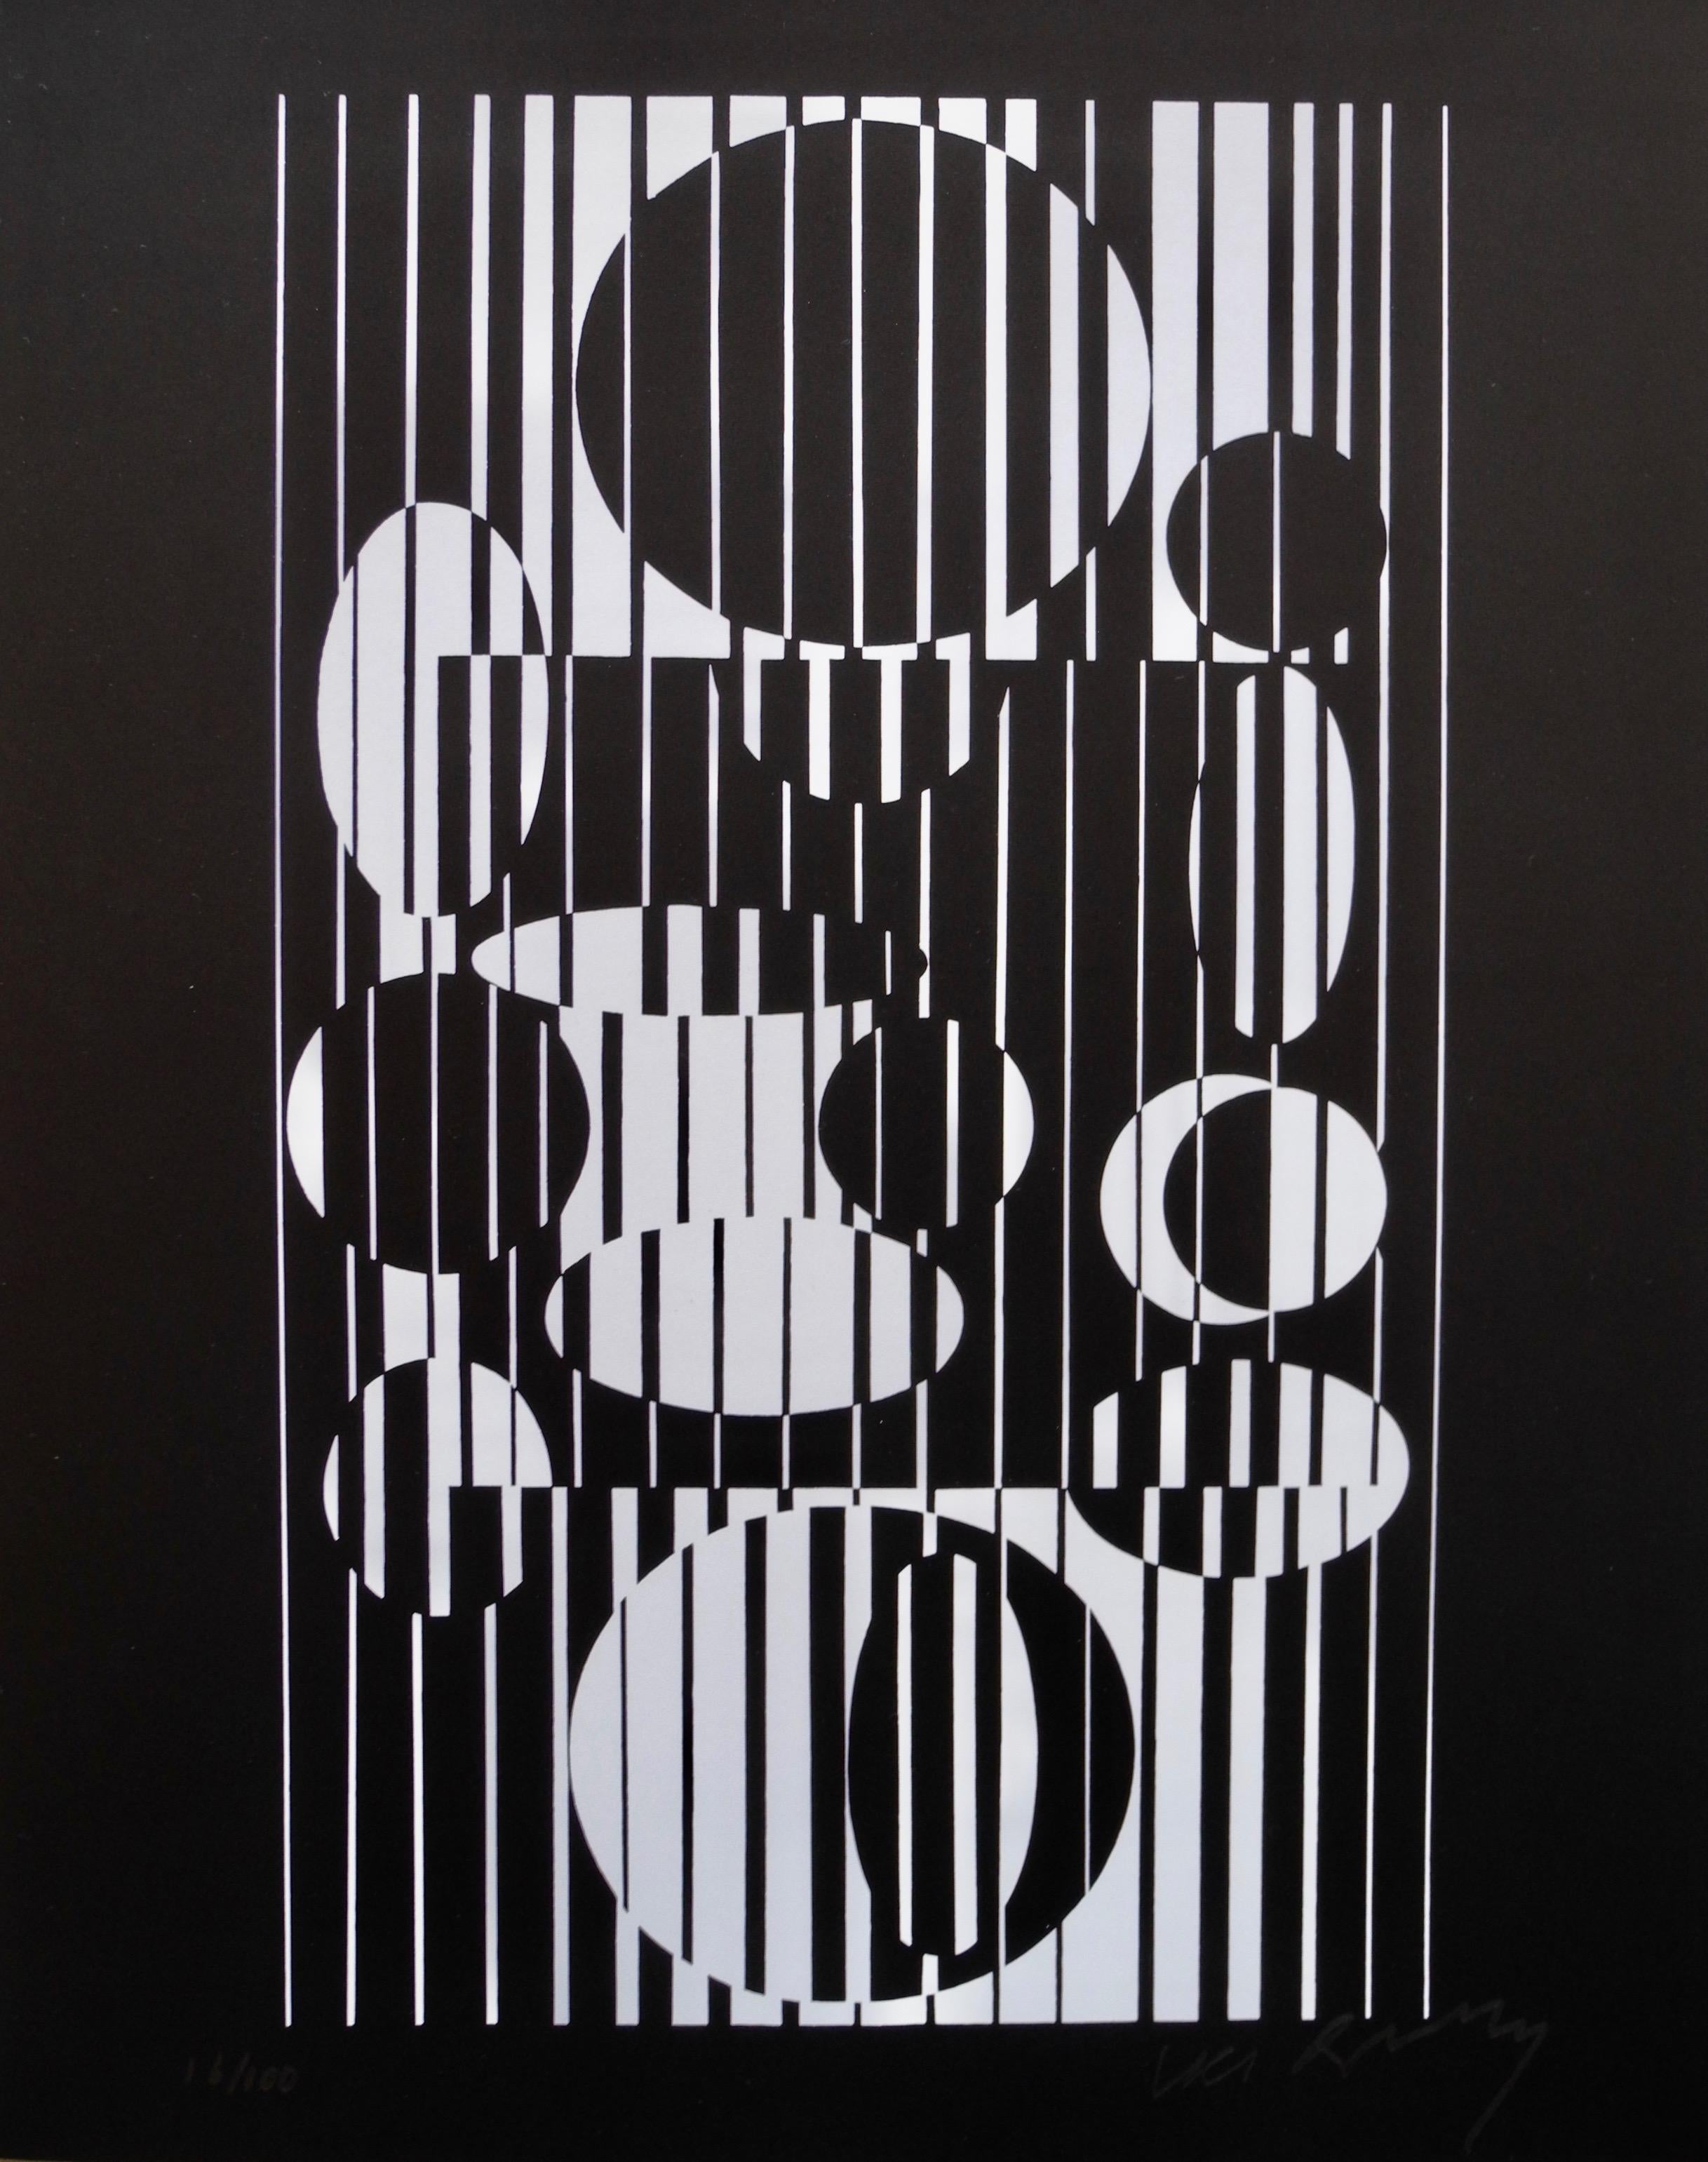 These optical black and white prints by pop artist Victor Vasarely where printed in Switzerland by Griffon Editions in 1973. They came from a portfolio titled 